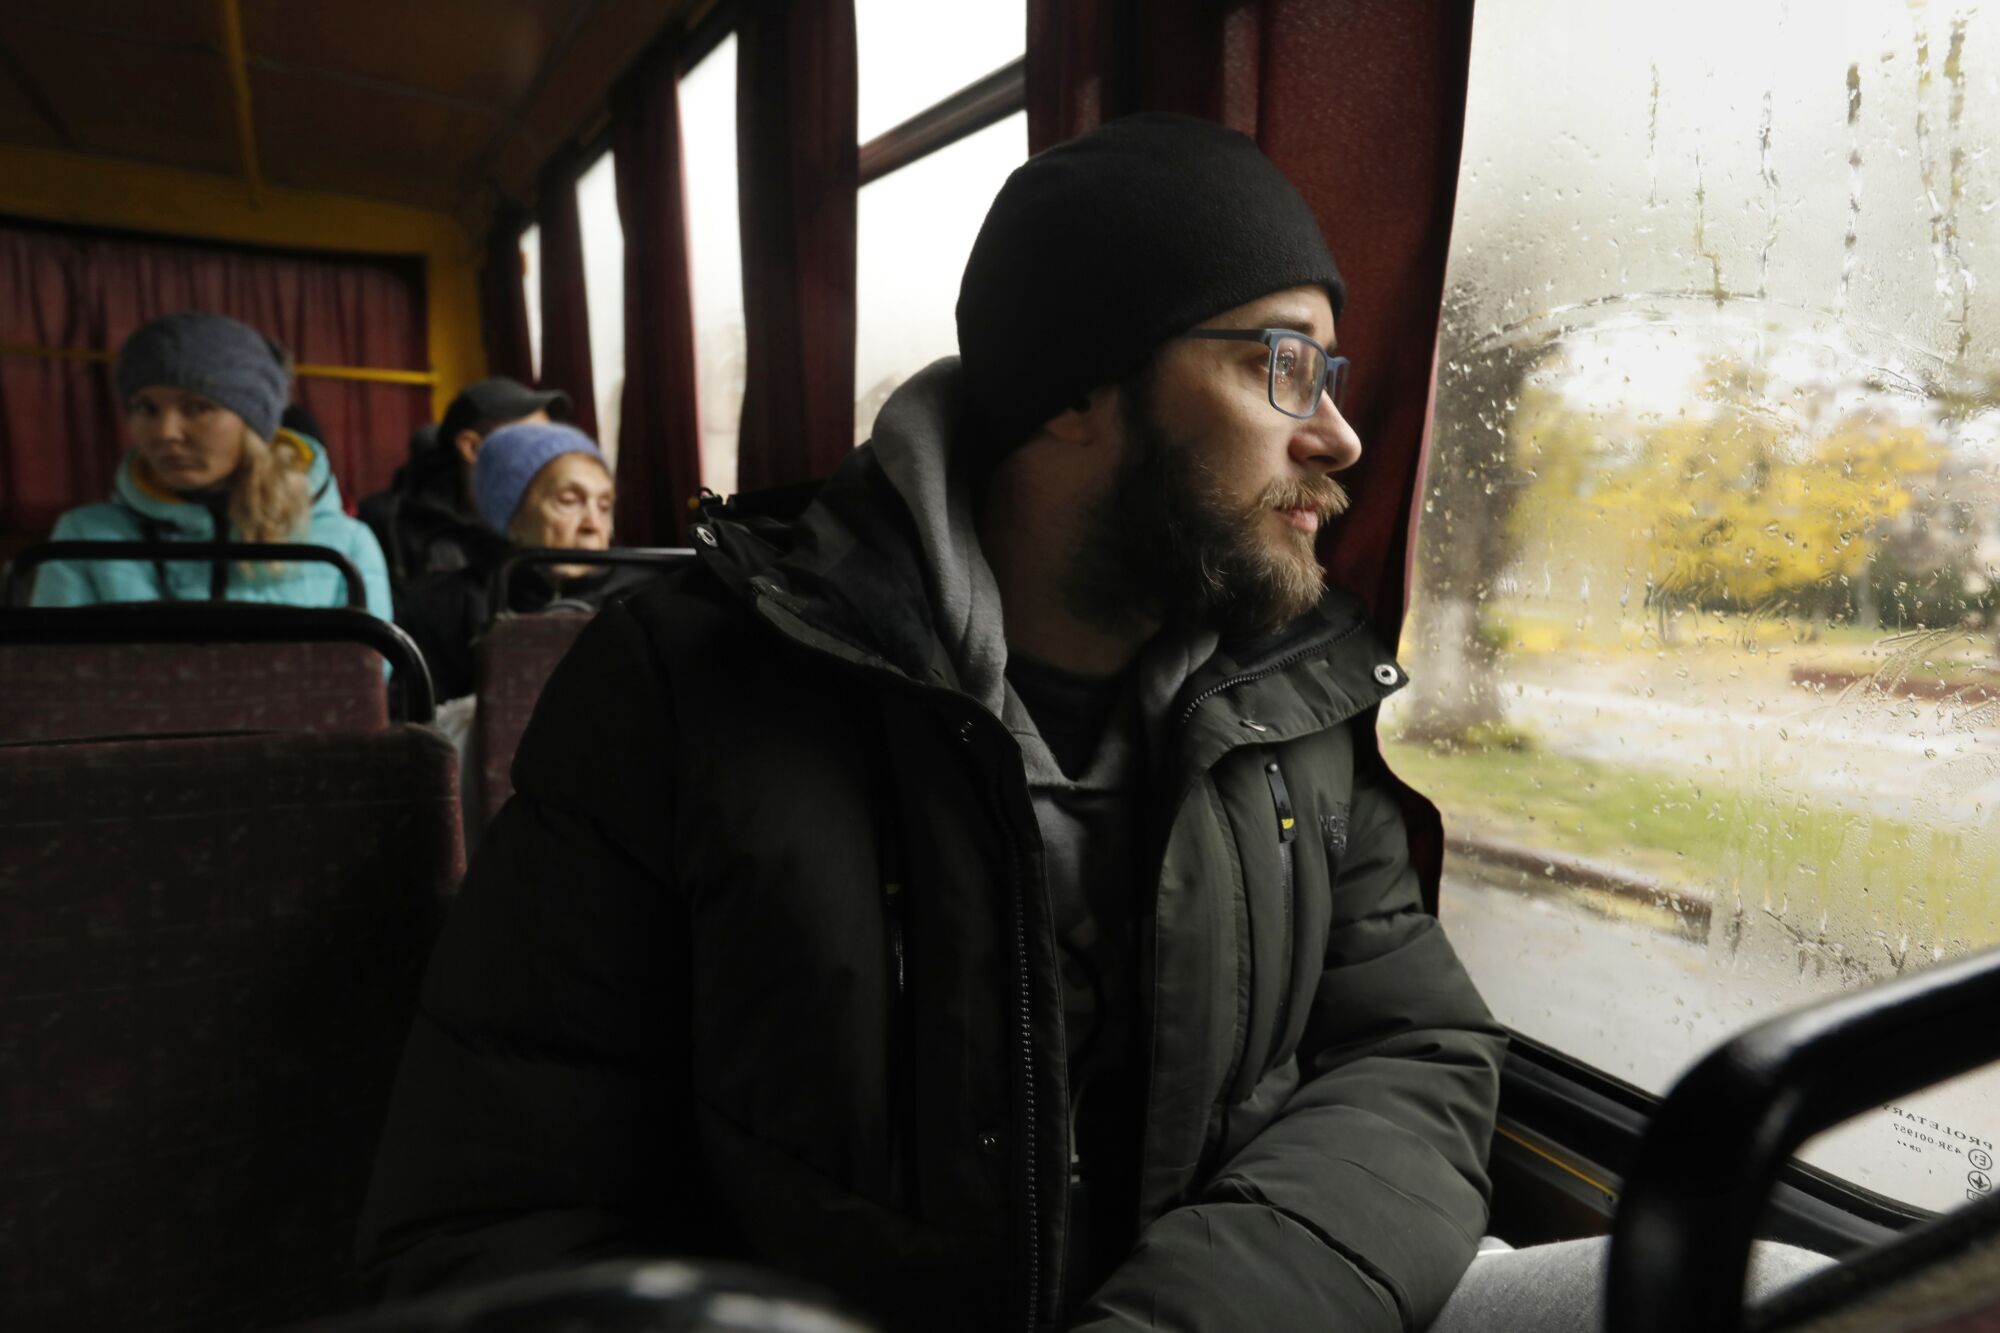 A man with a dark beard, glasses, a dark hat and a winter jacket looks out the window of a bus 